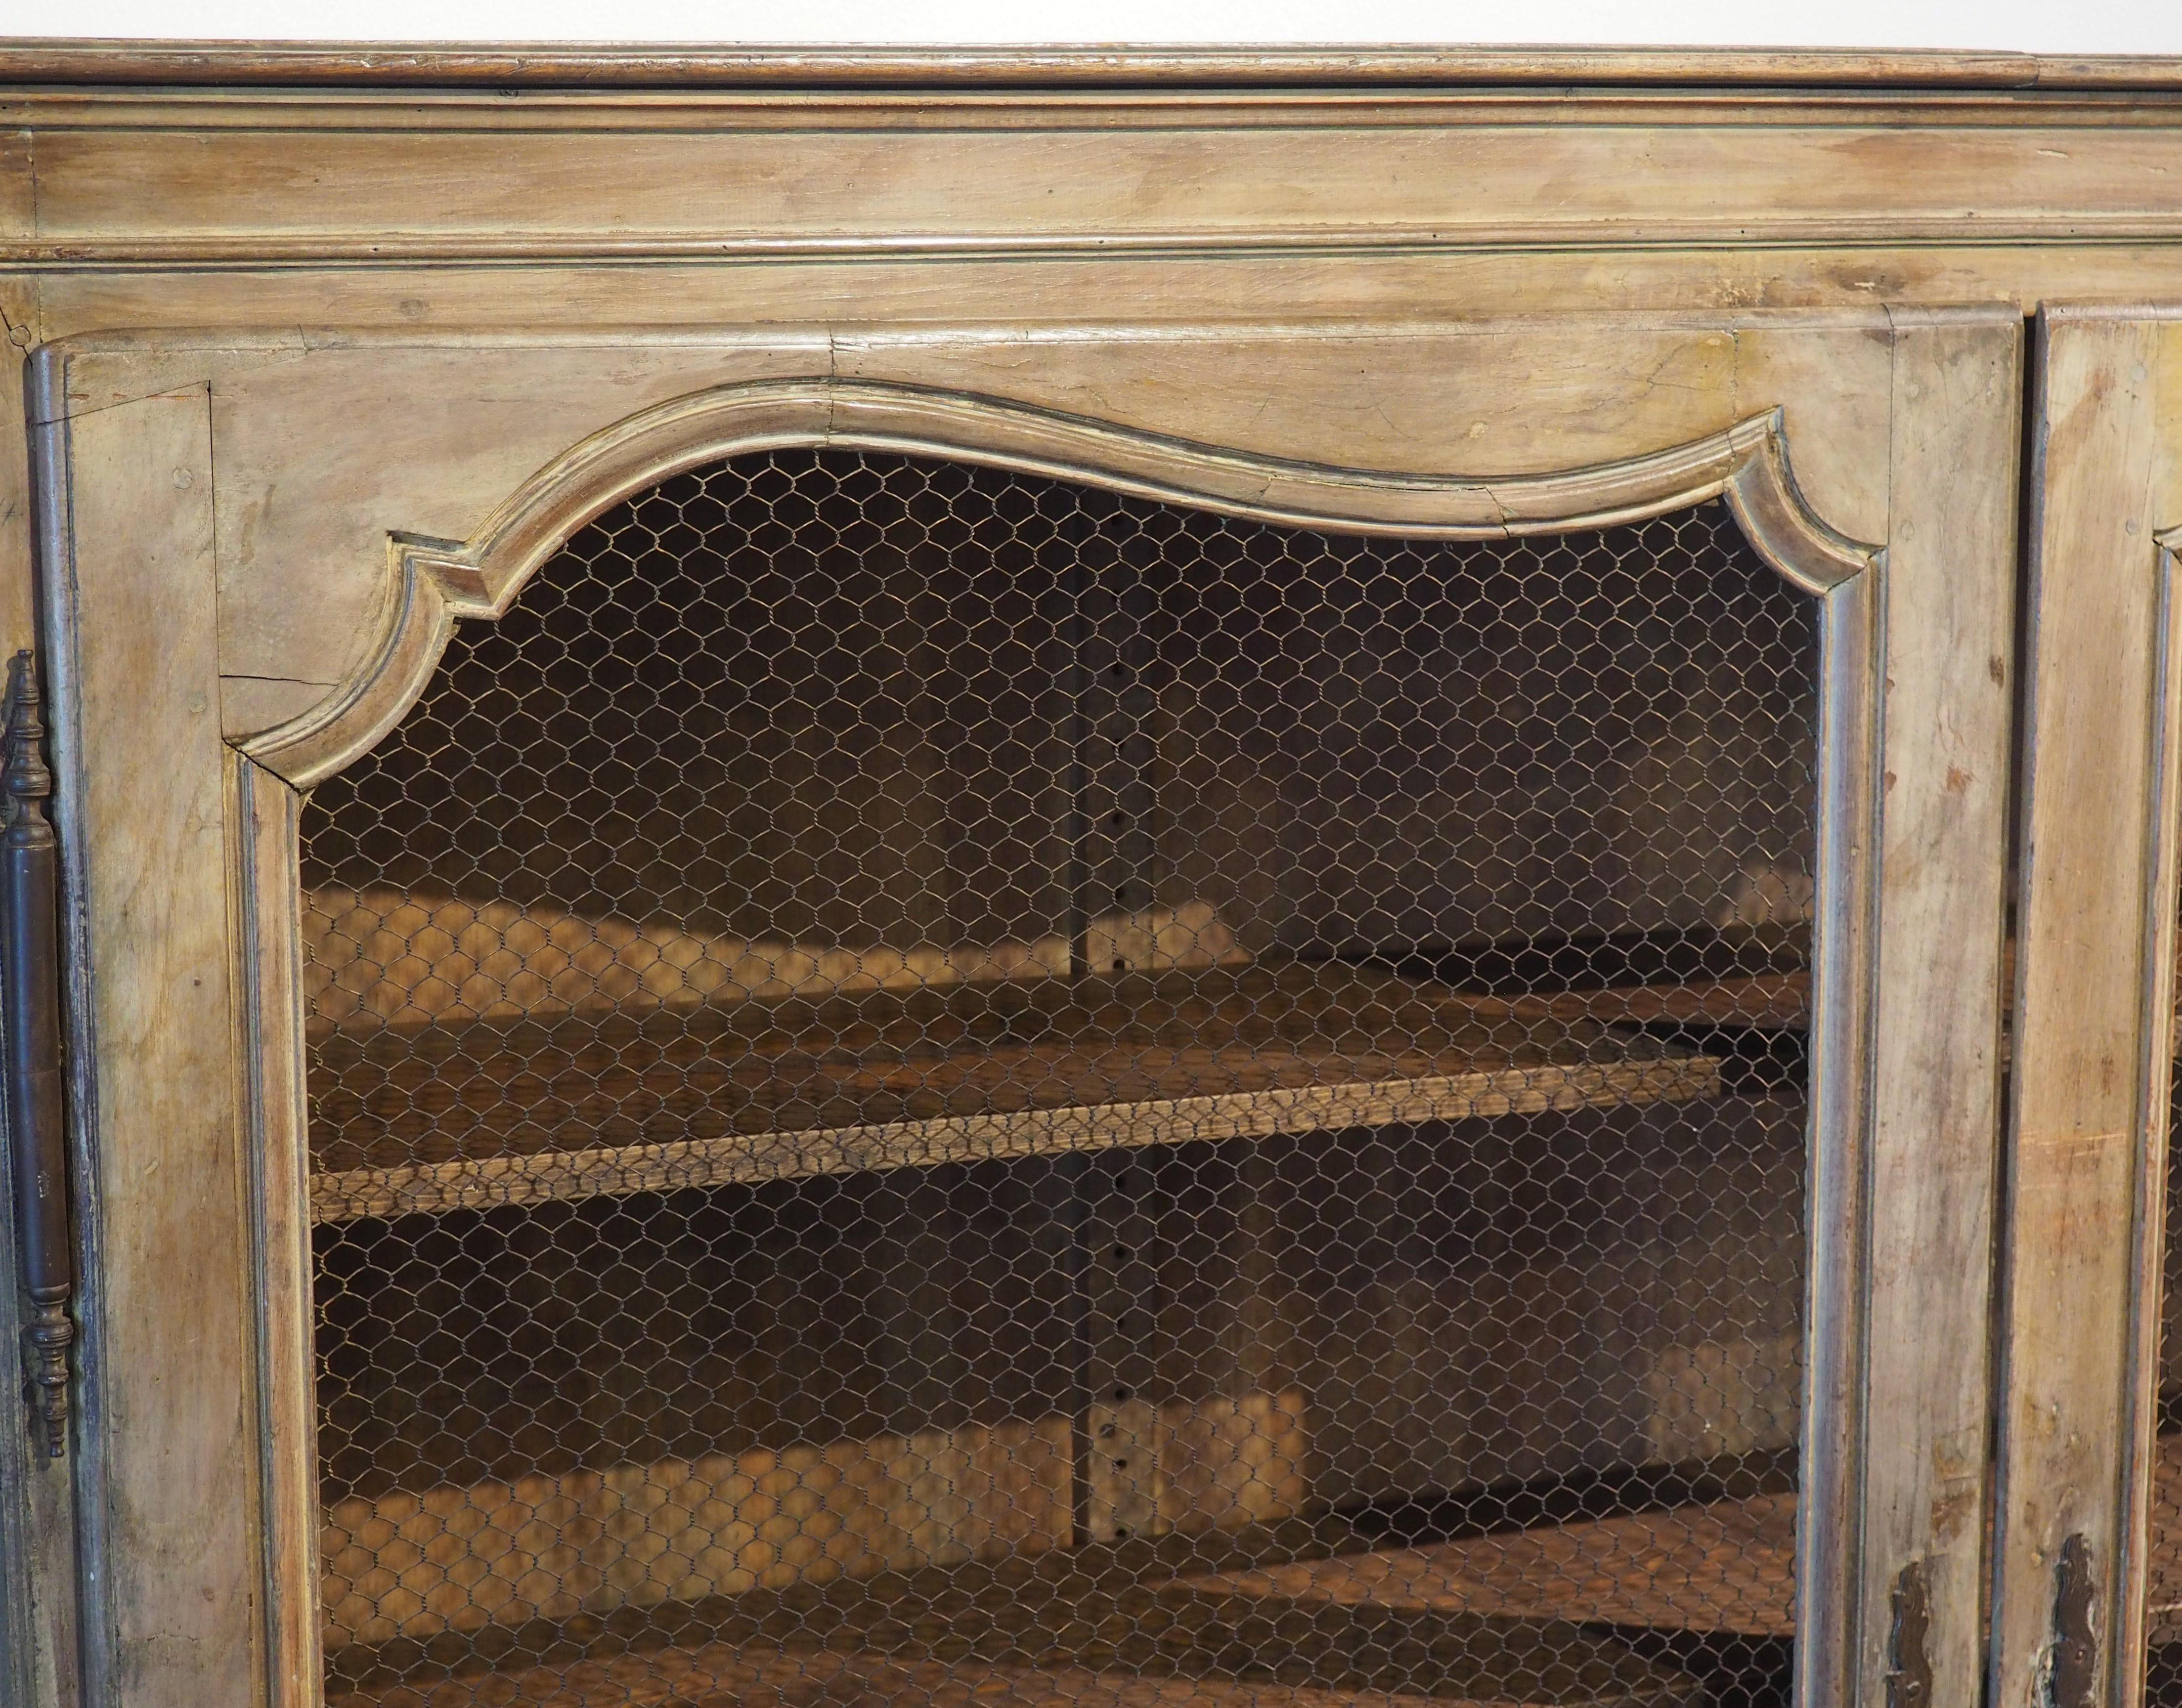 Early 19th Century French Bibliotheque Cabinet with Wire Mesh Door Panels 7